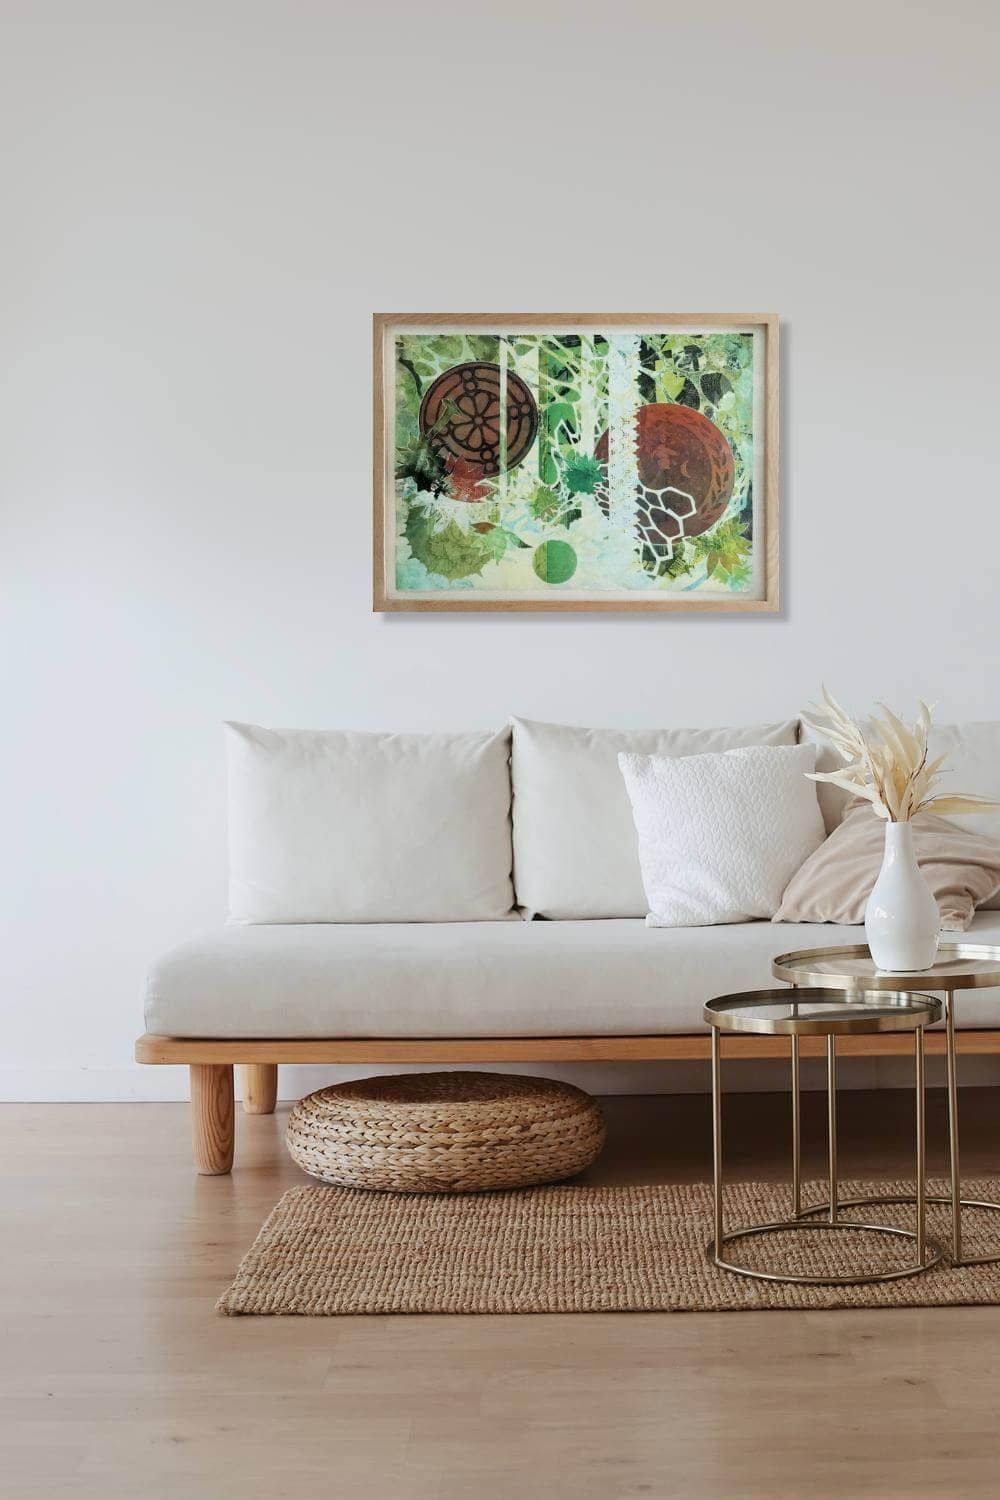 Organic Shapes contemporary art with green colors brings nature into this living space